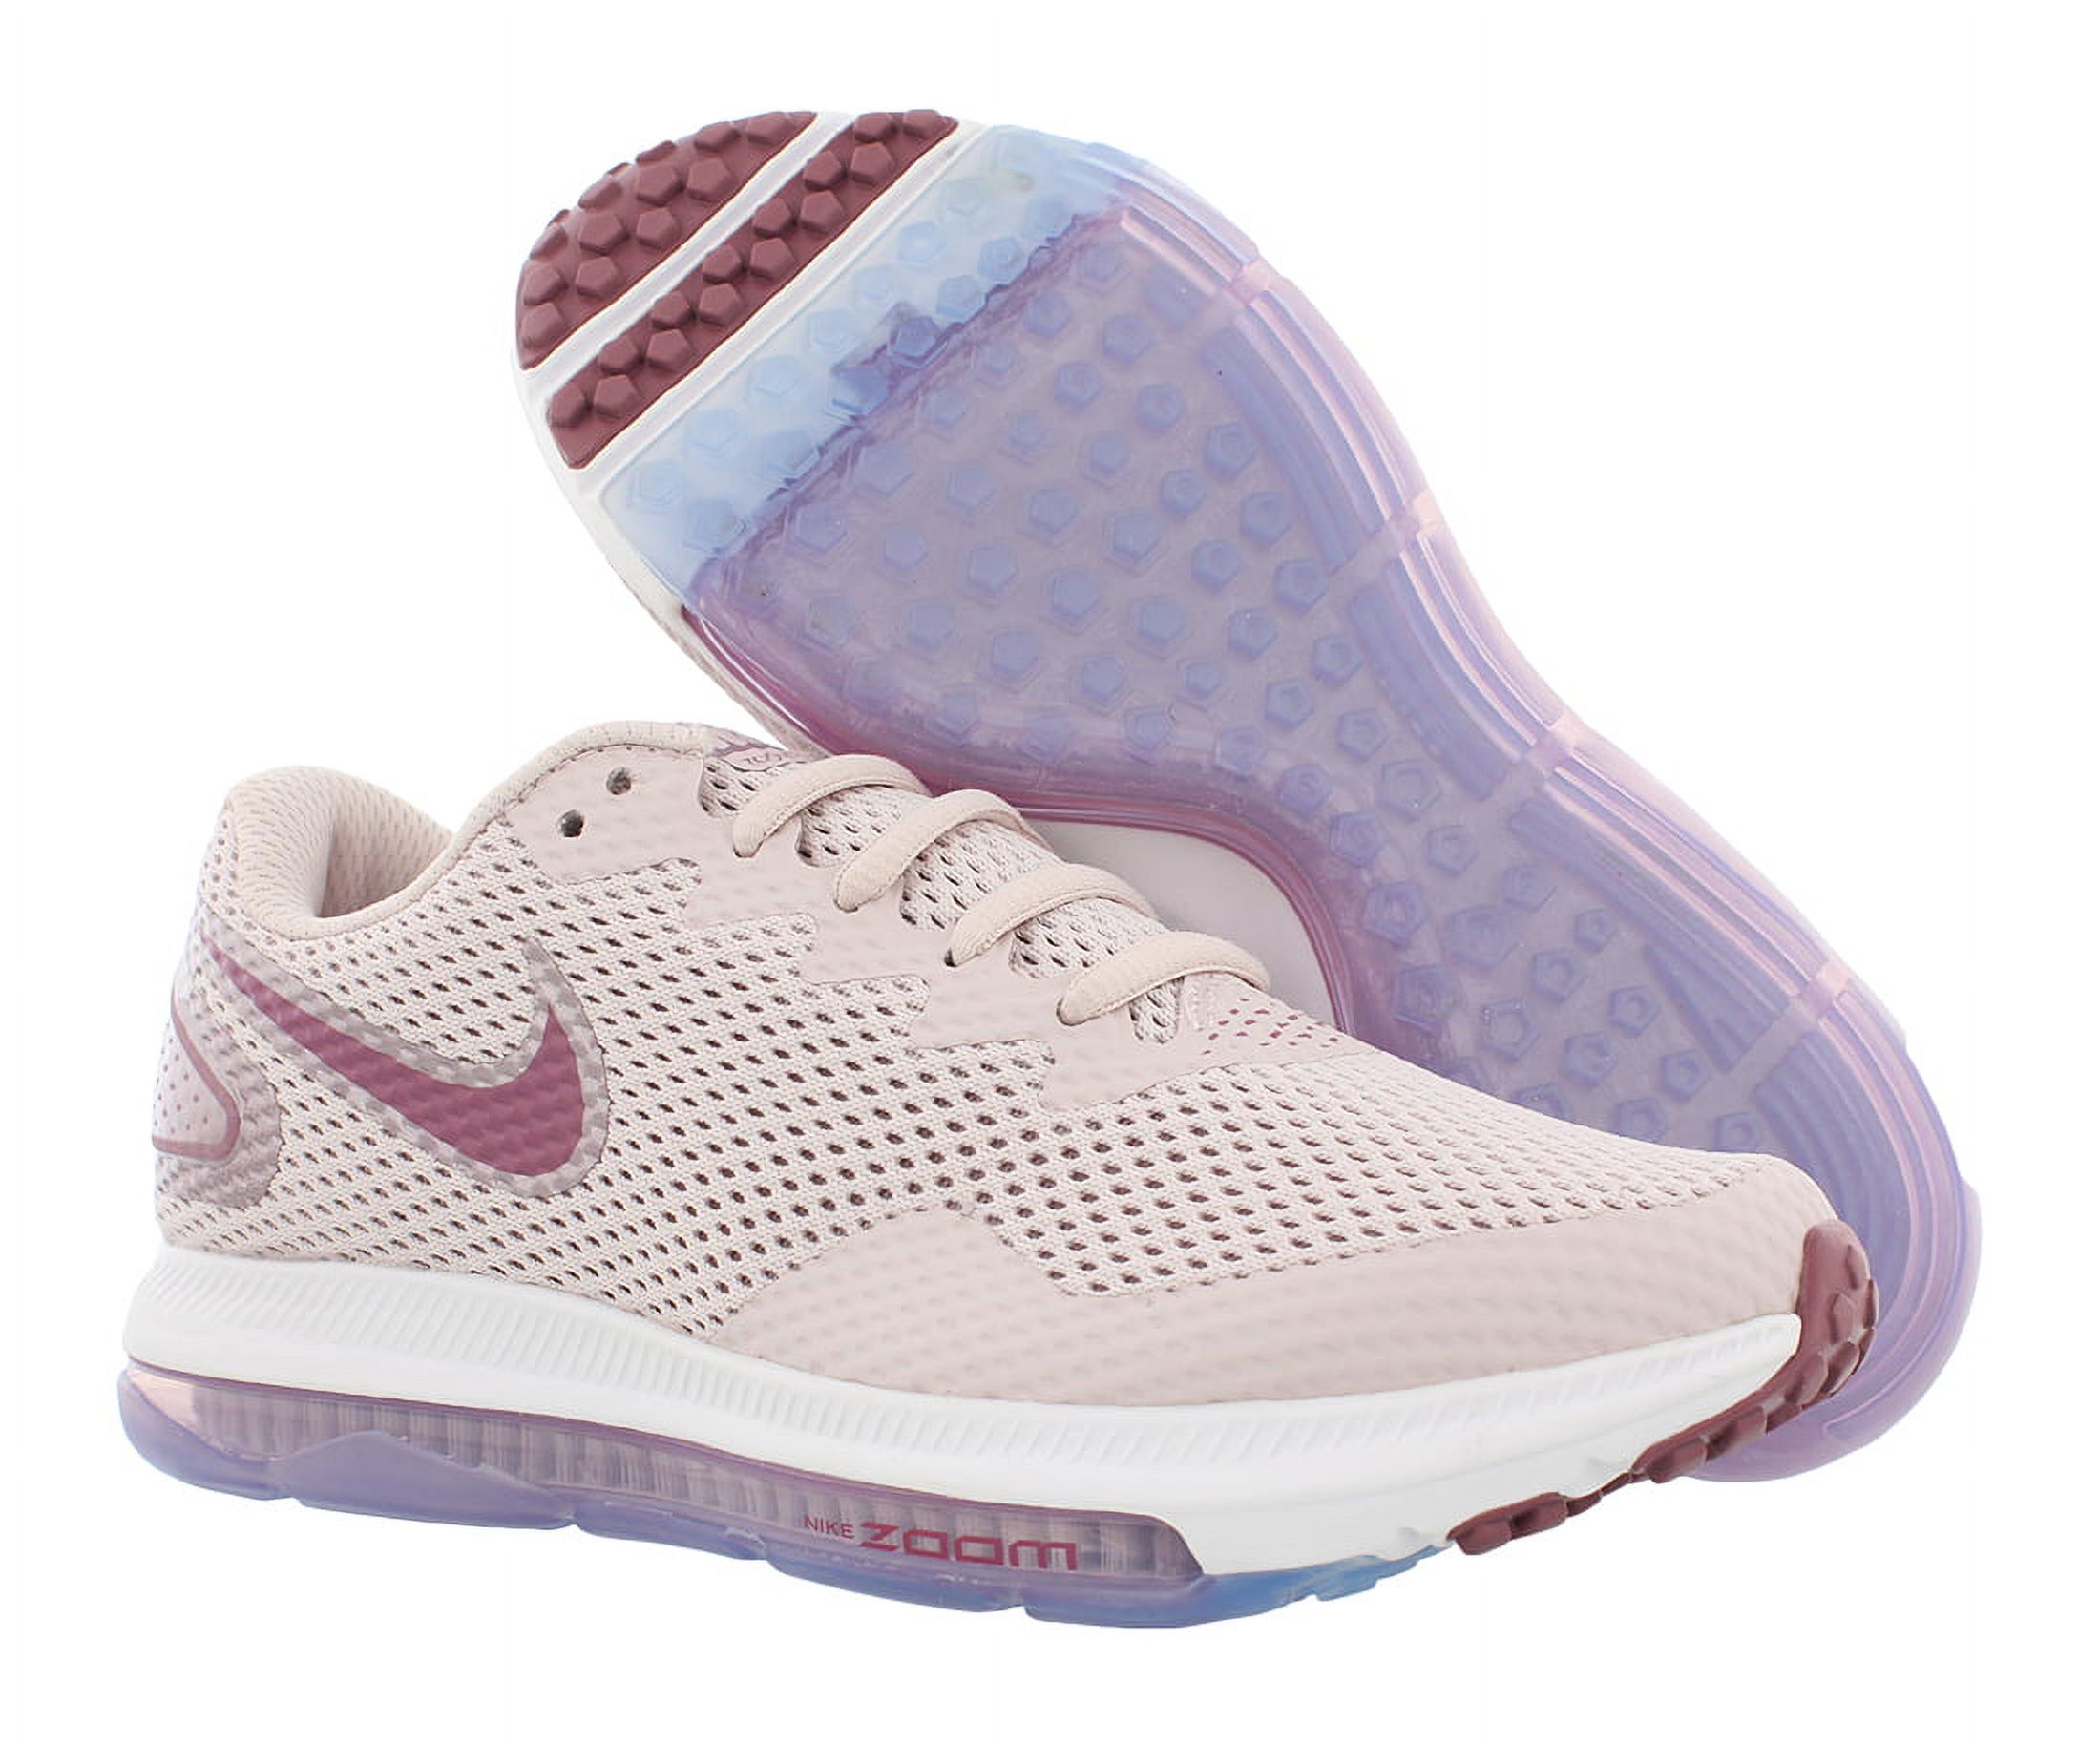 Nike Zoom All Out Low 2 Womens Shoes Size 7.5, Color: Rose/Plm - image 4 of 4